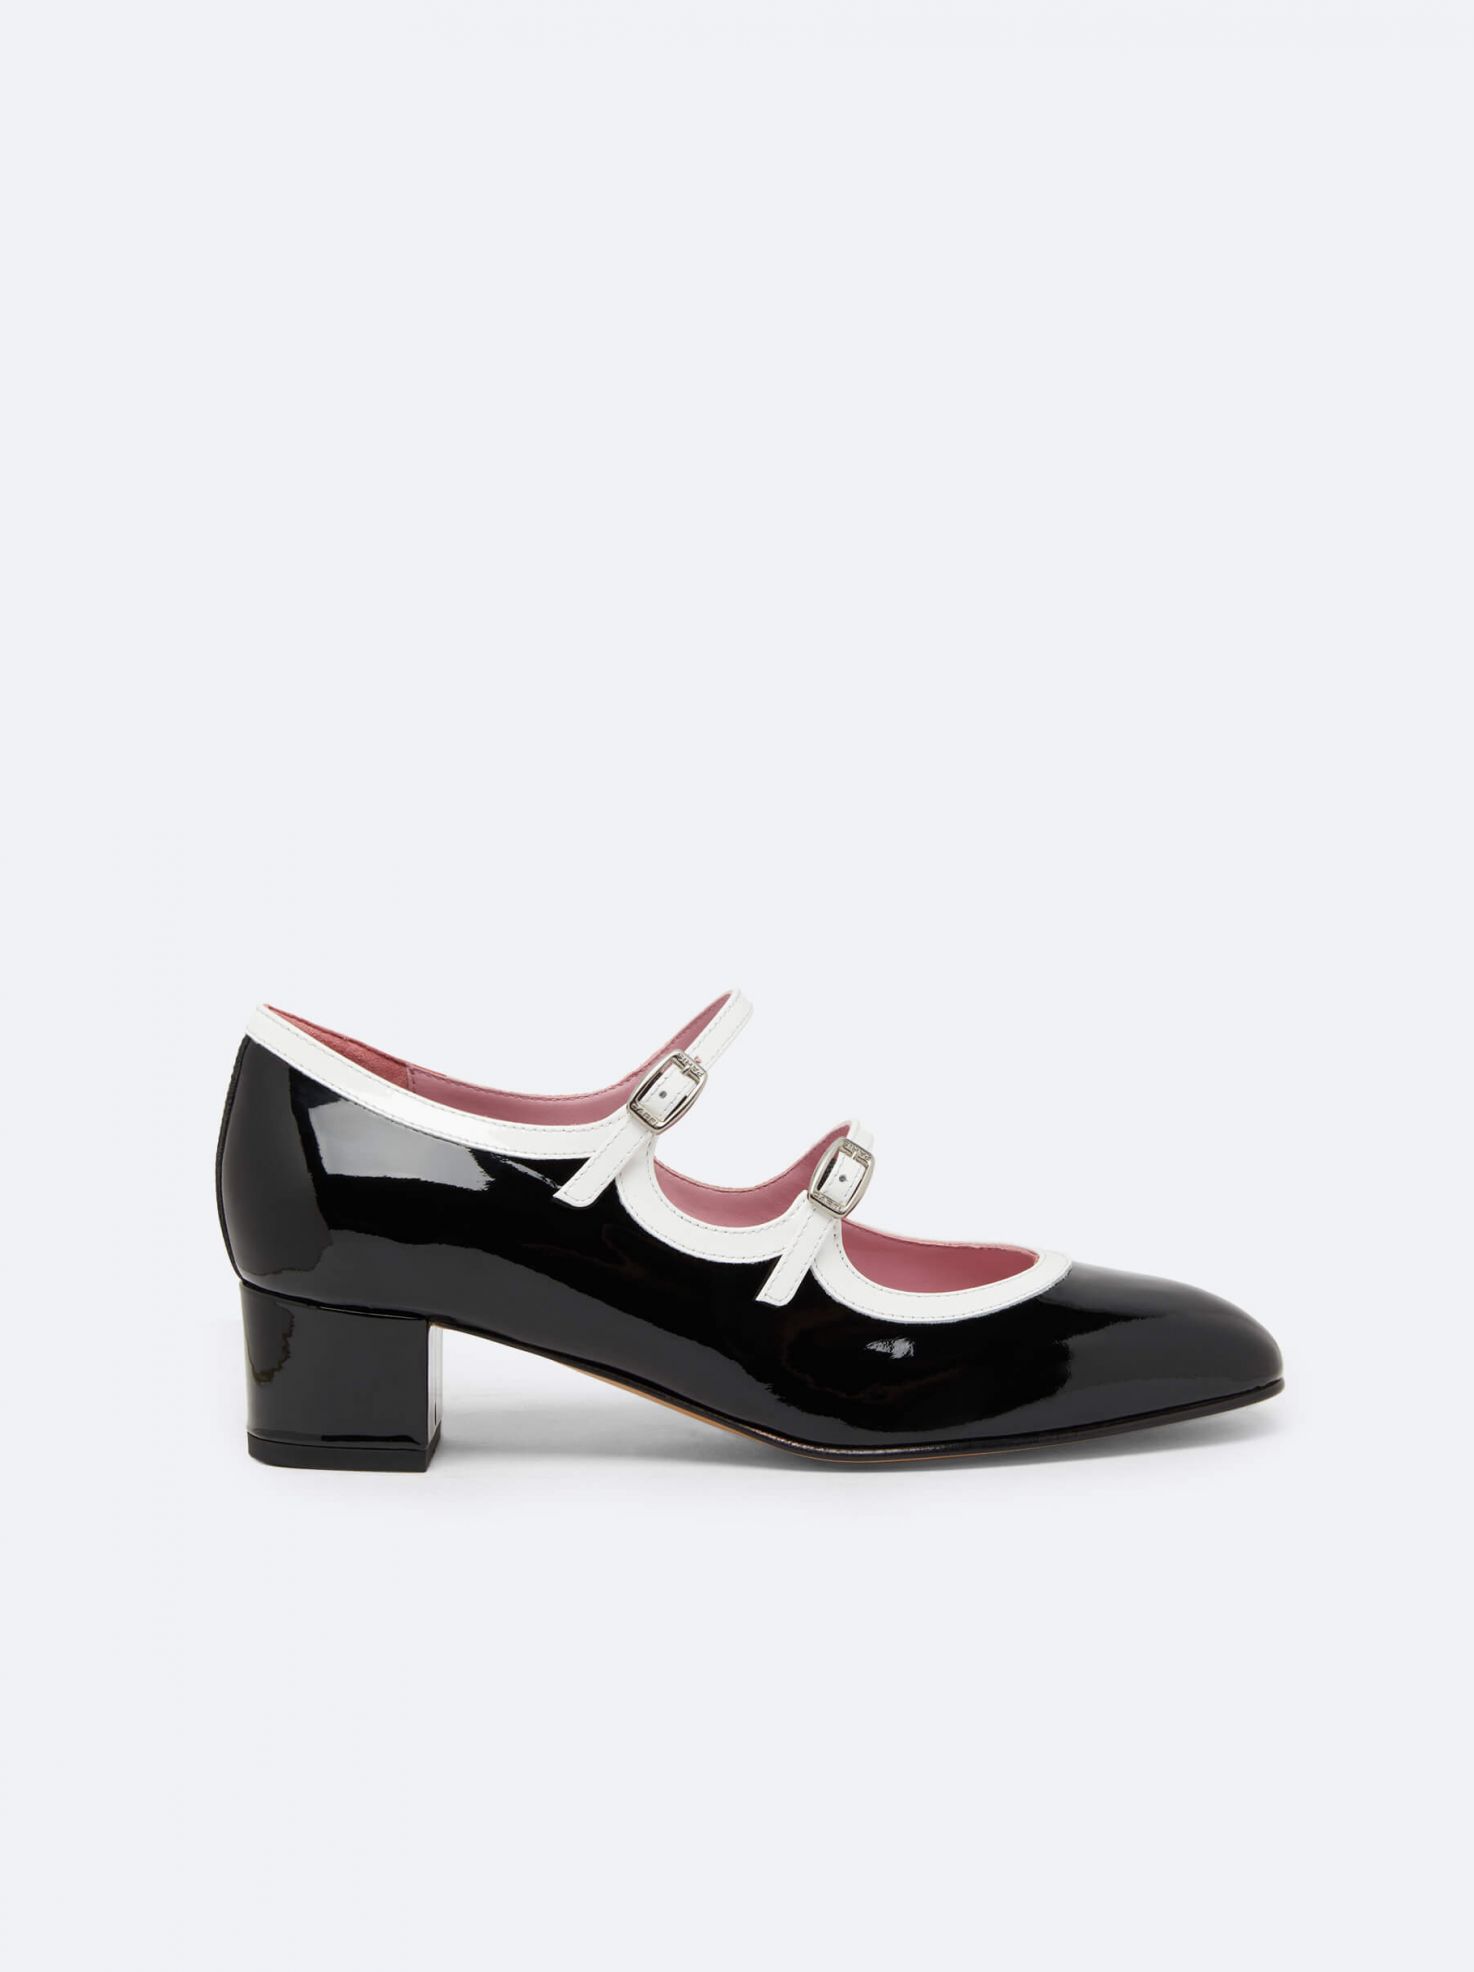 https://www.carel.fr/12271-product_miniature_xs2x/black-and-white-patent-leather-mary-janes-pumps.jpg